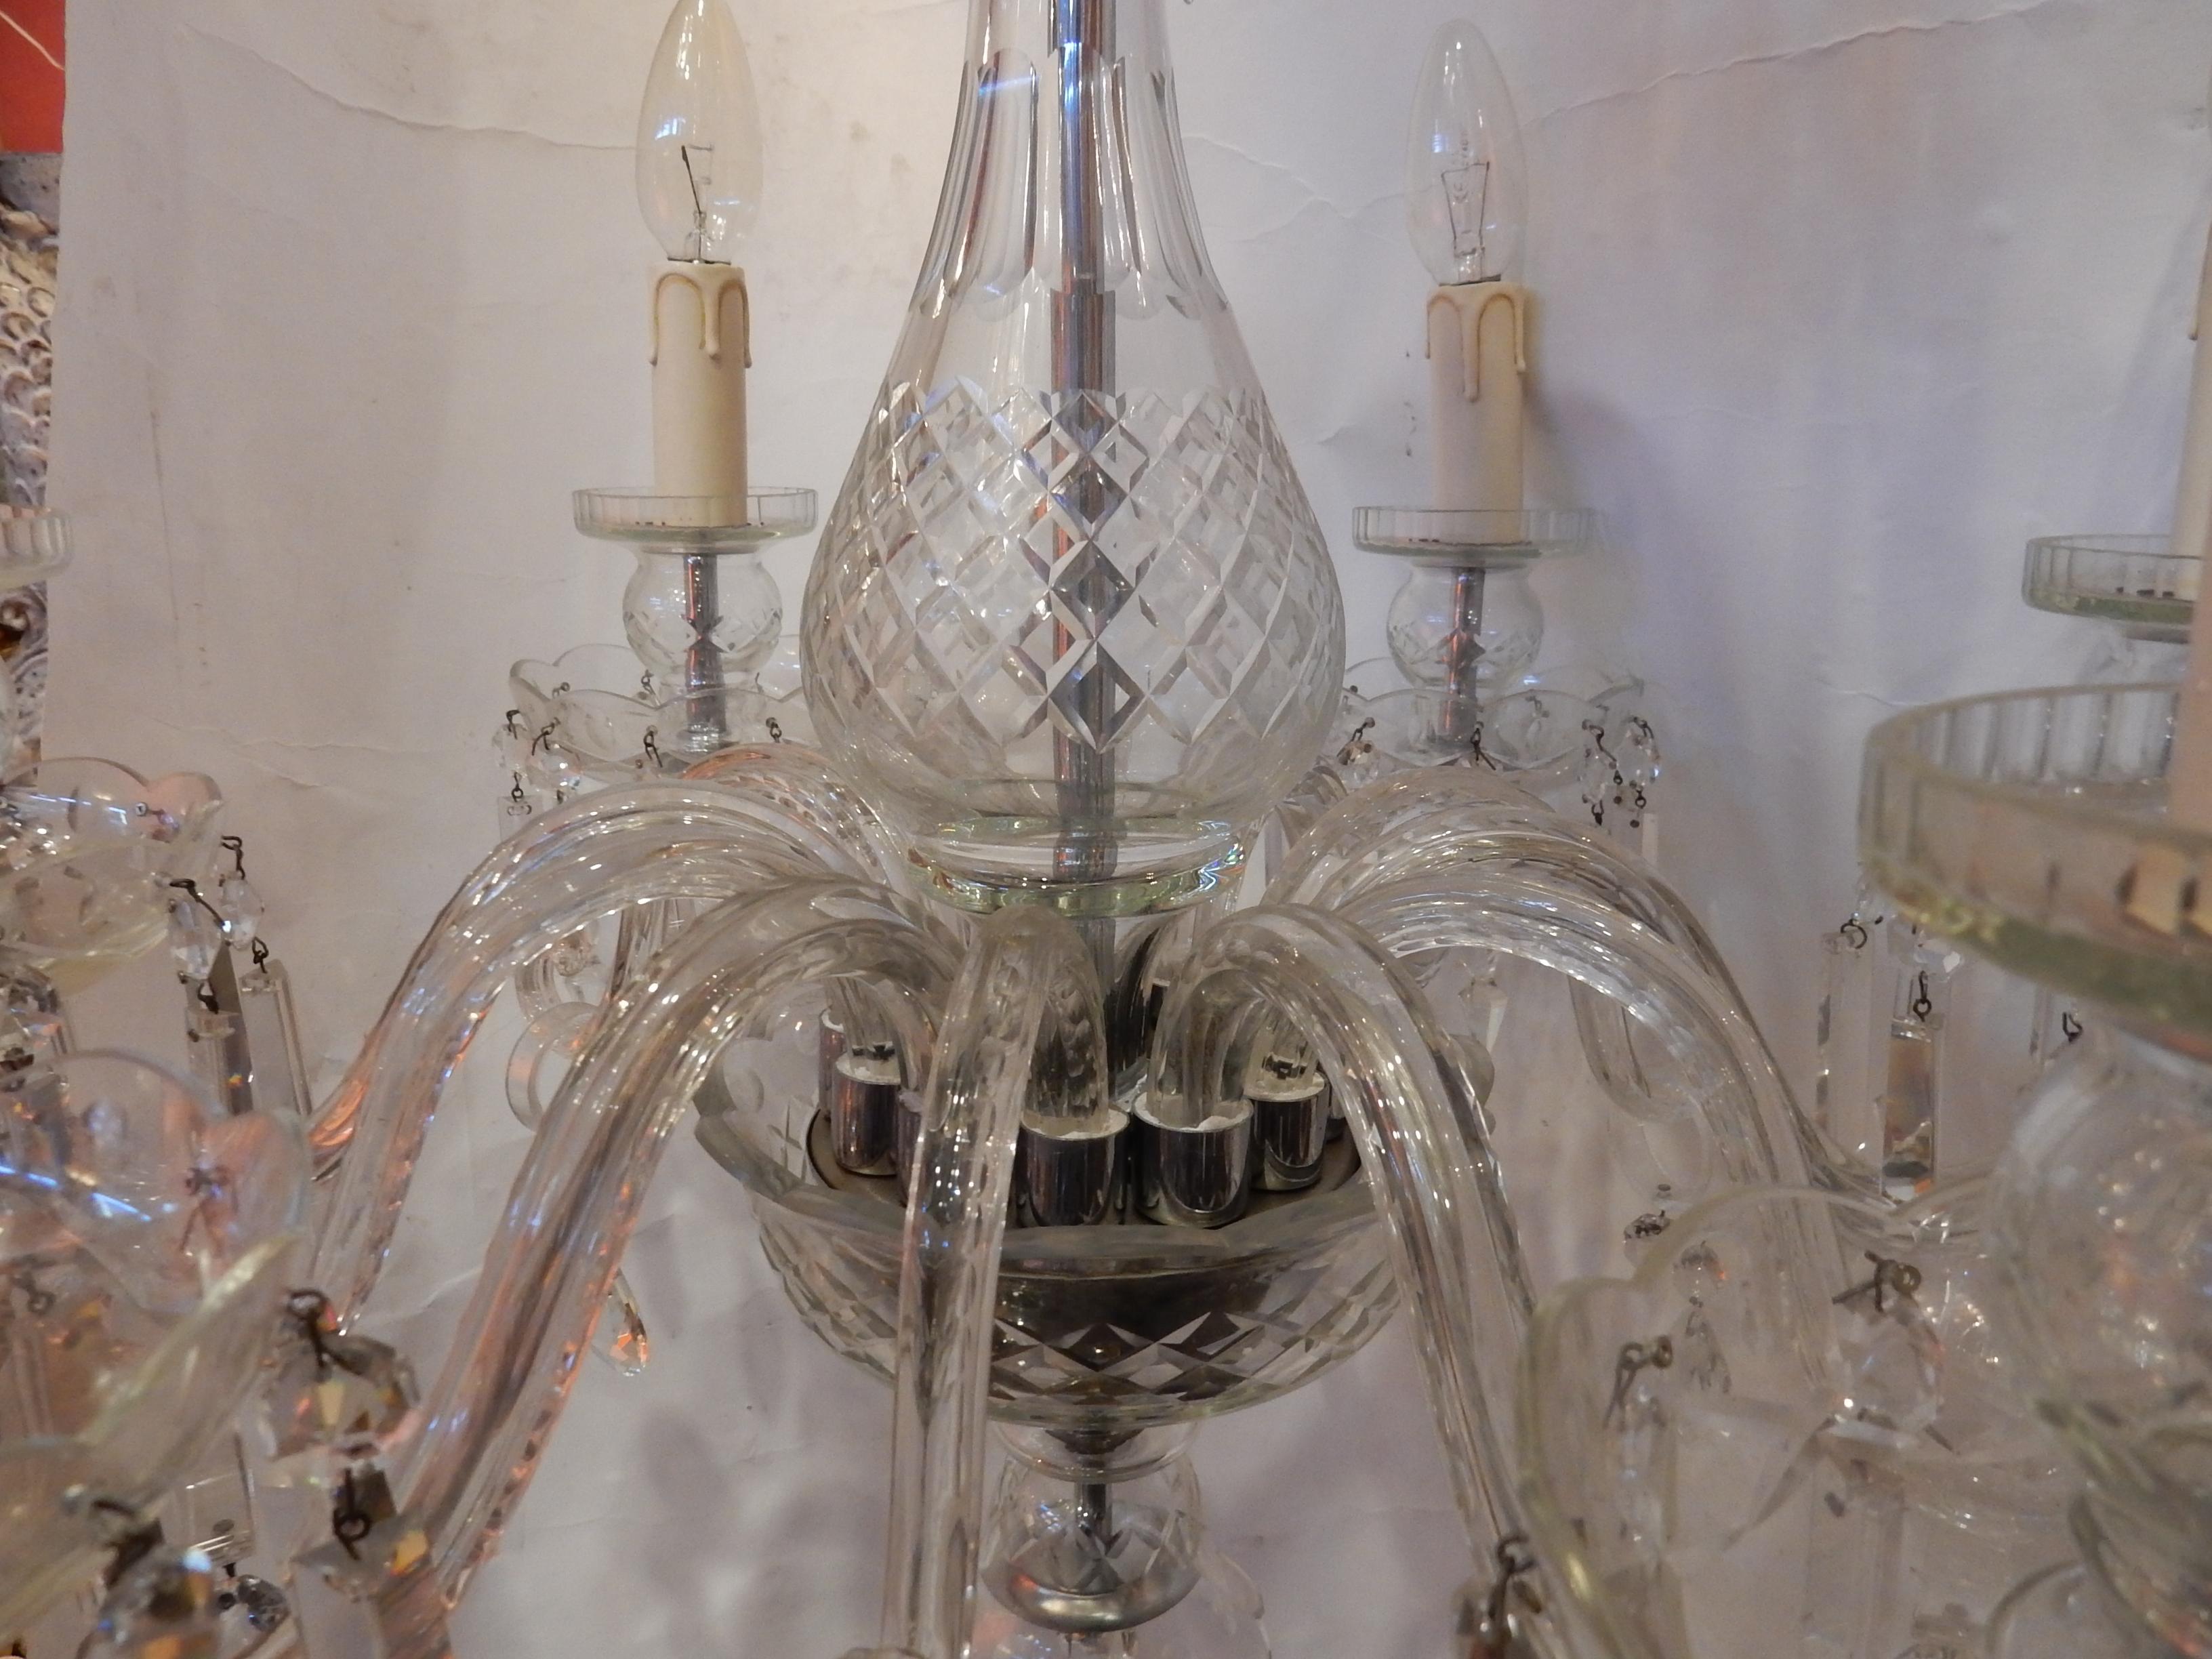 1920-1940 Bohémian or Baccarat Crystal Chandelier 6 Arms For Sale 2